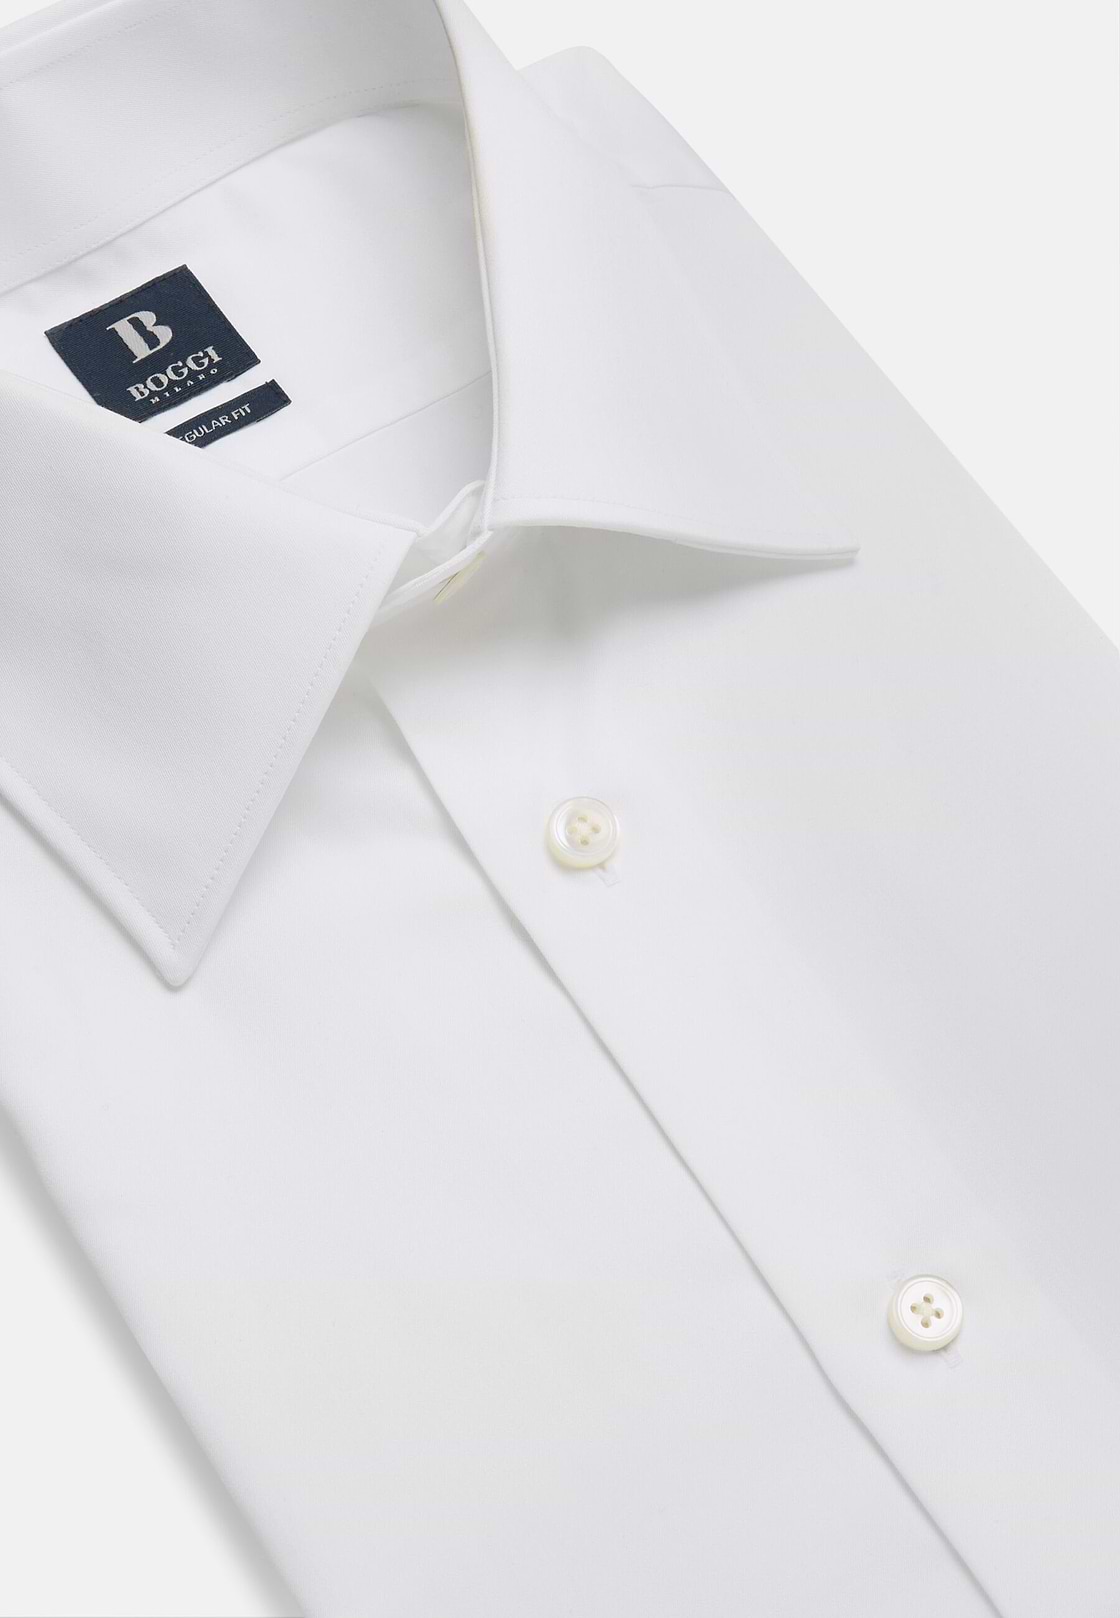 Regular Fit Shirt In White Cotton Twill, White, hi-res